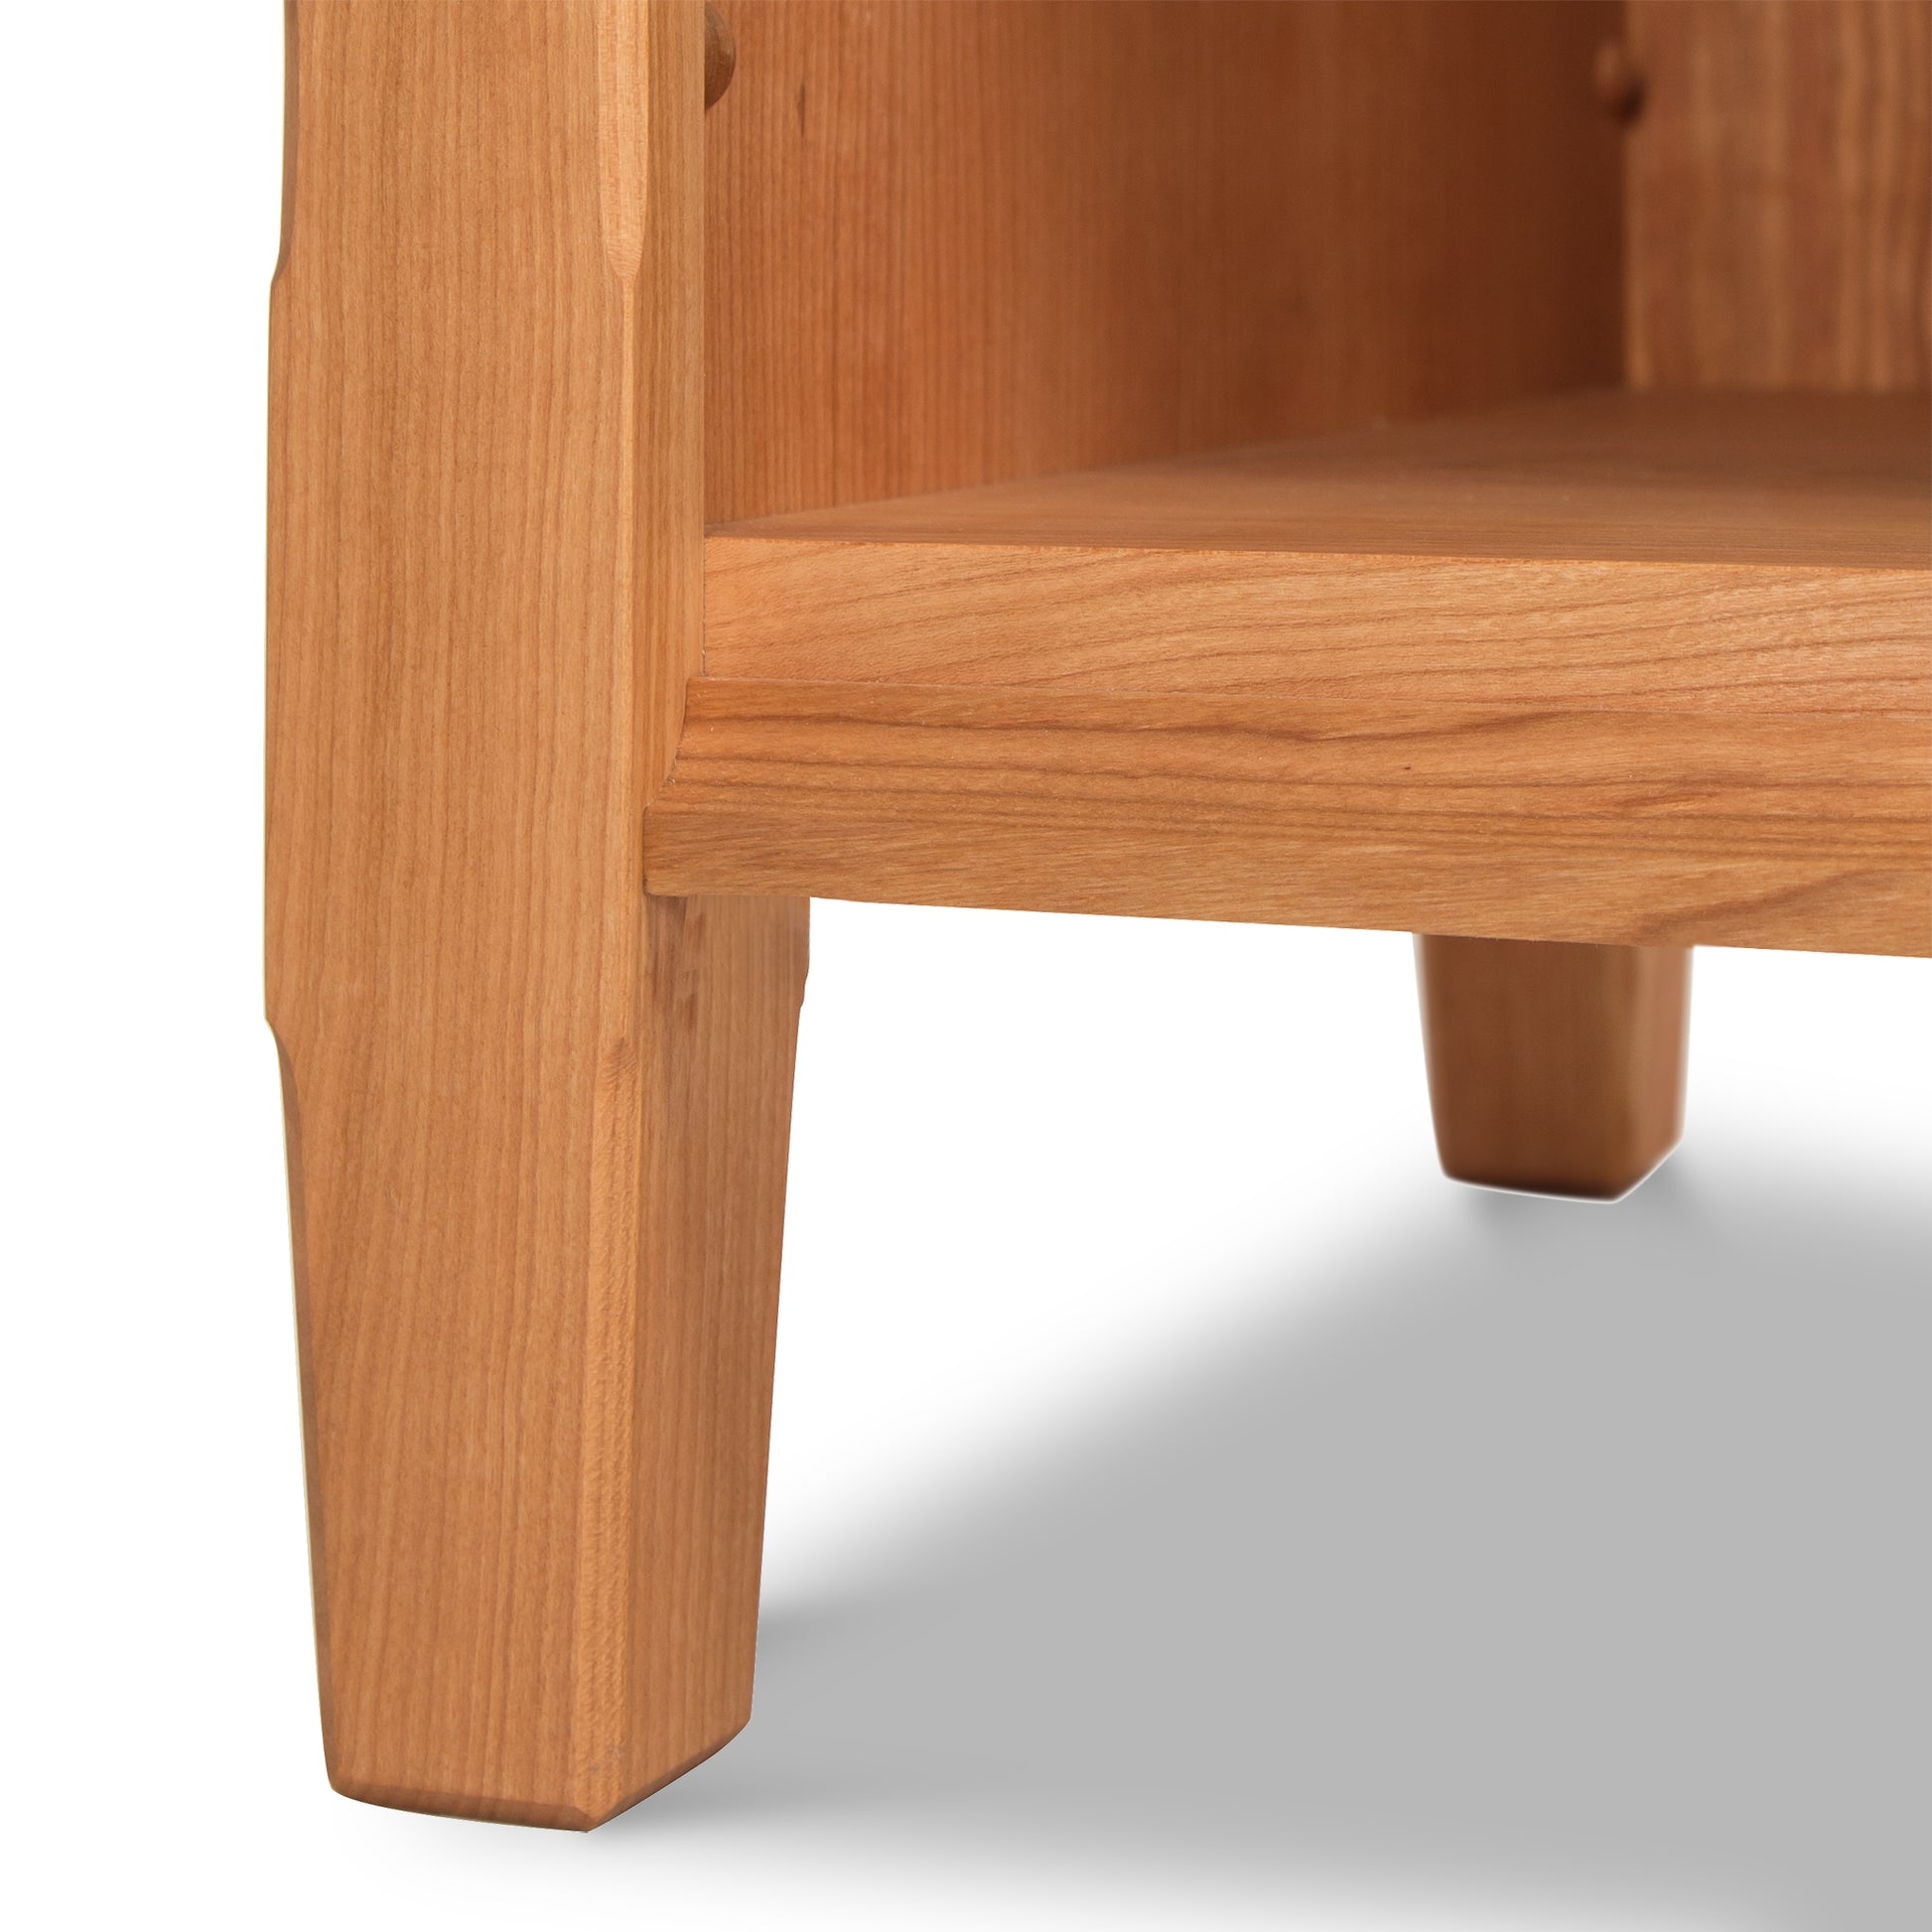 A close up view of a Maple Corner Woodworks Vermont Shaker 1-Drawer Enclosed Shelf Nightstand, showcasing natural hardwoods and exquisite Vermont craftsmanship.